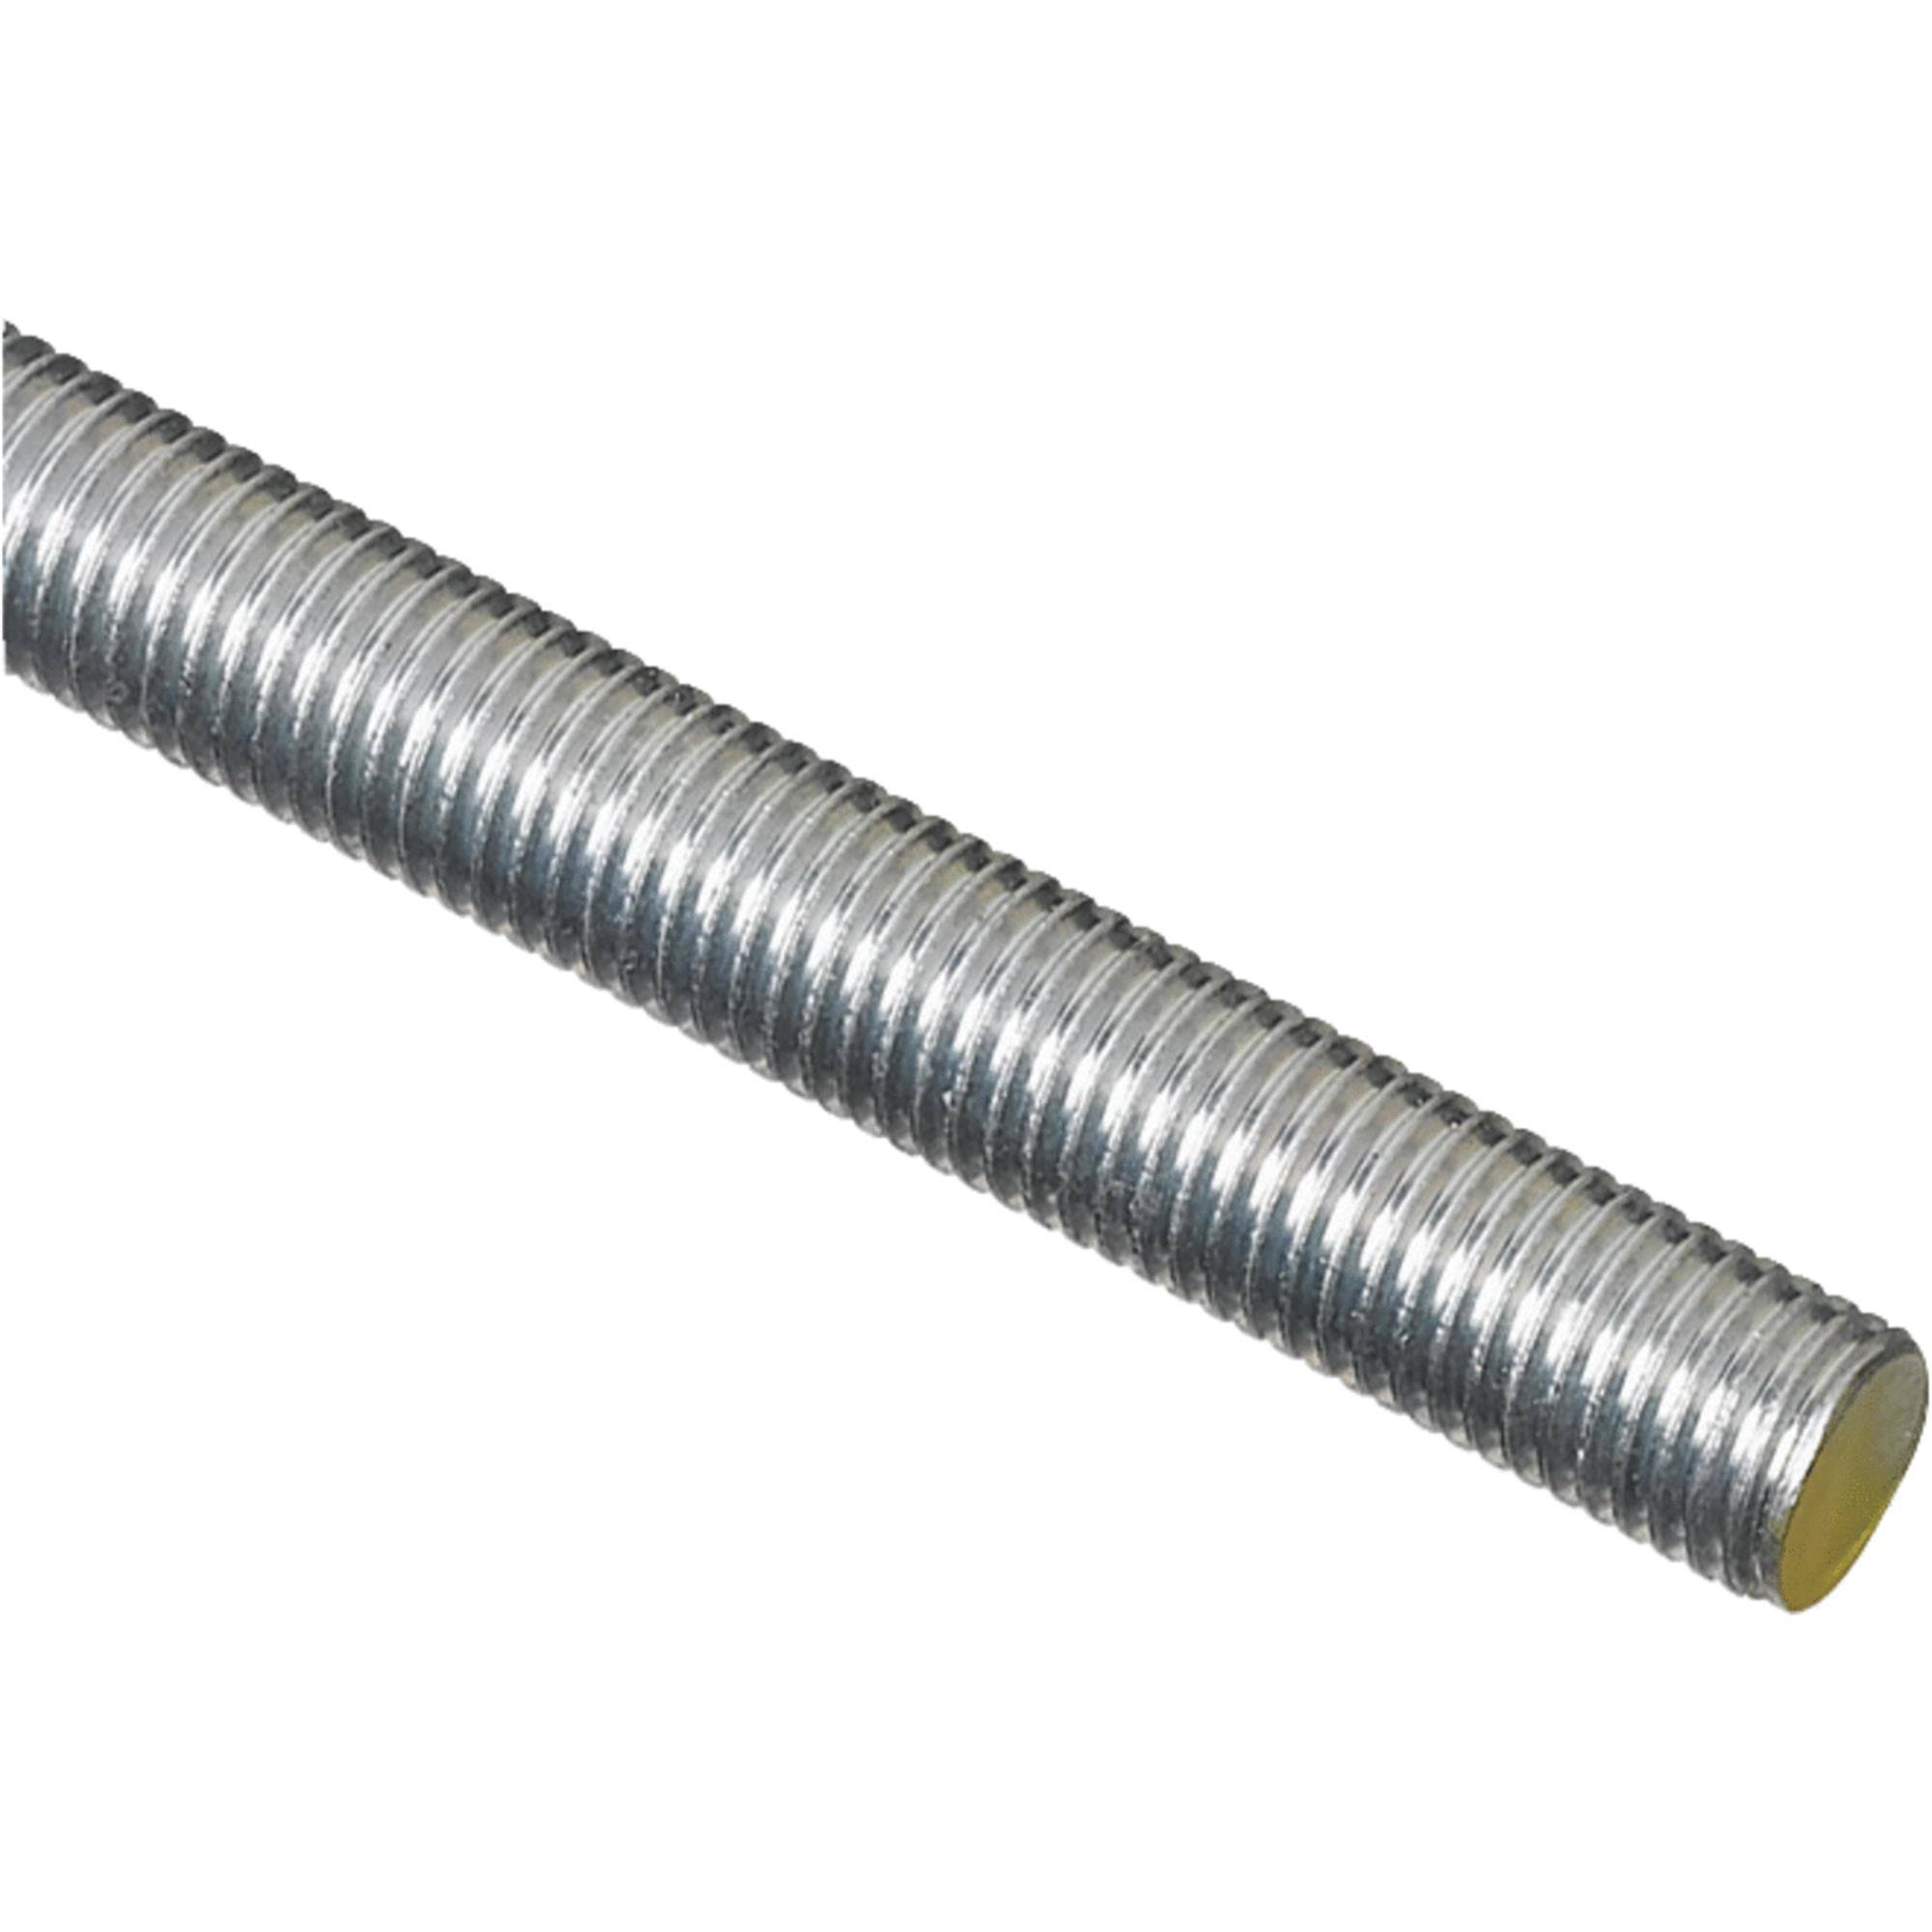 Stanley National Hardware 4000BC 3/4-10" x 24" Zinc Plated Steel Threaded Rod